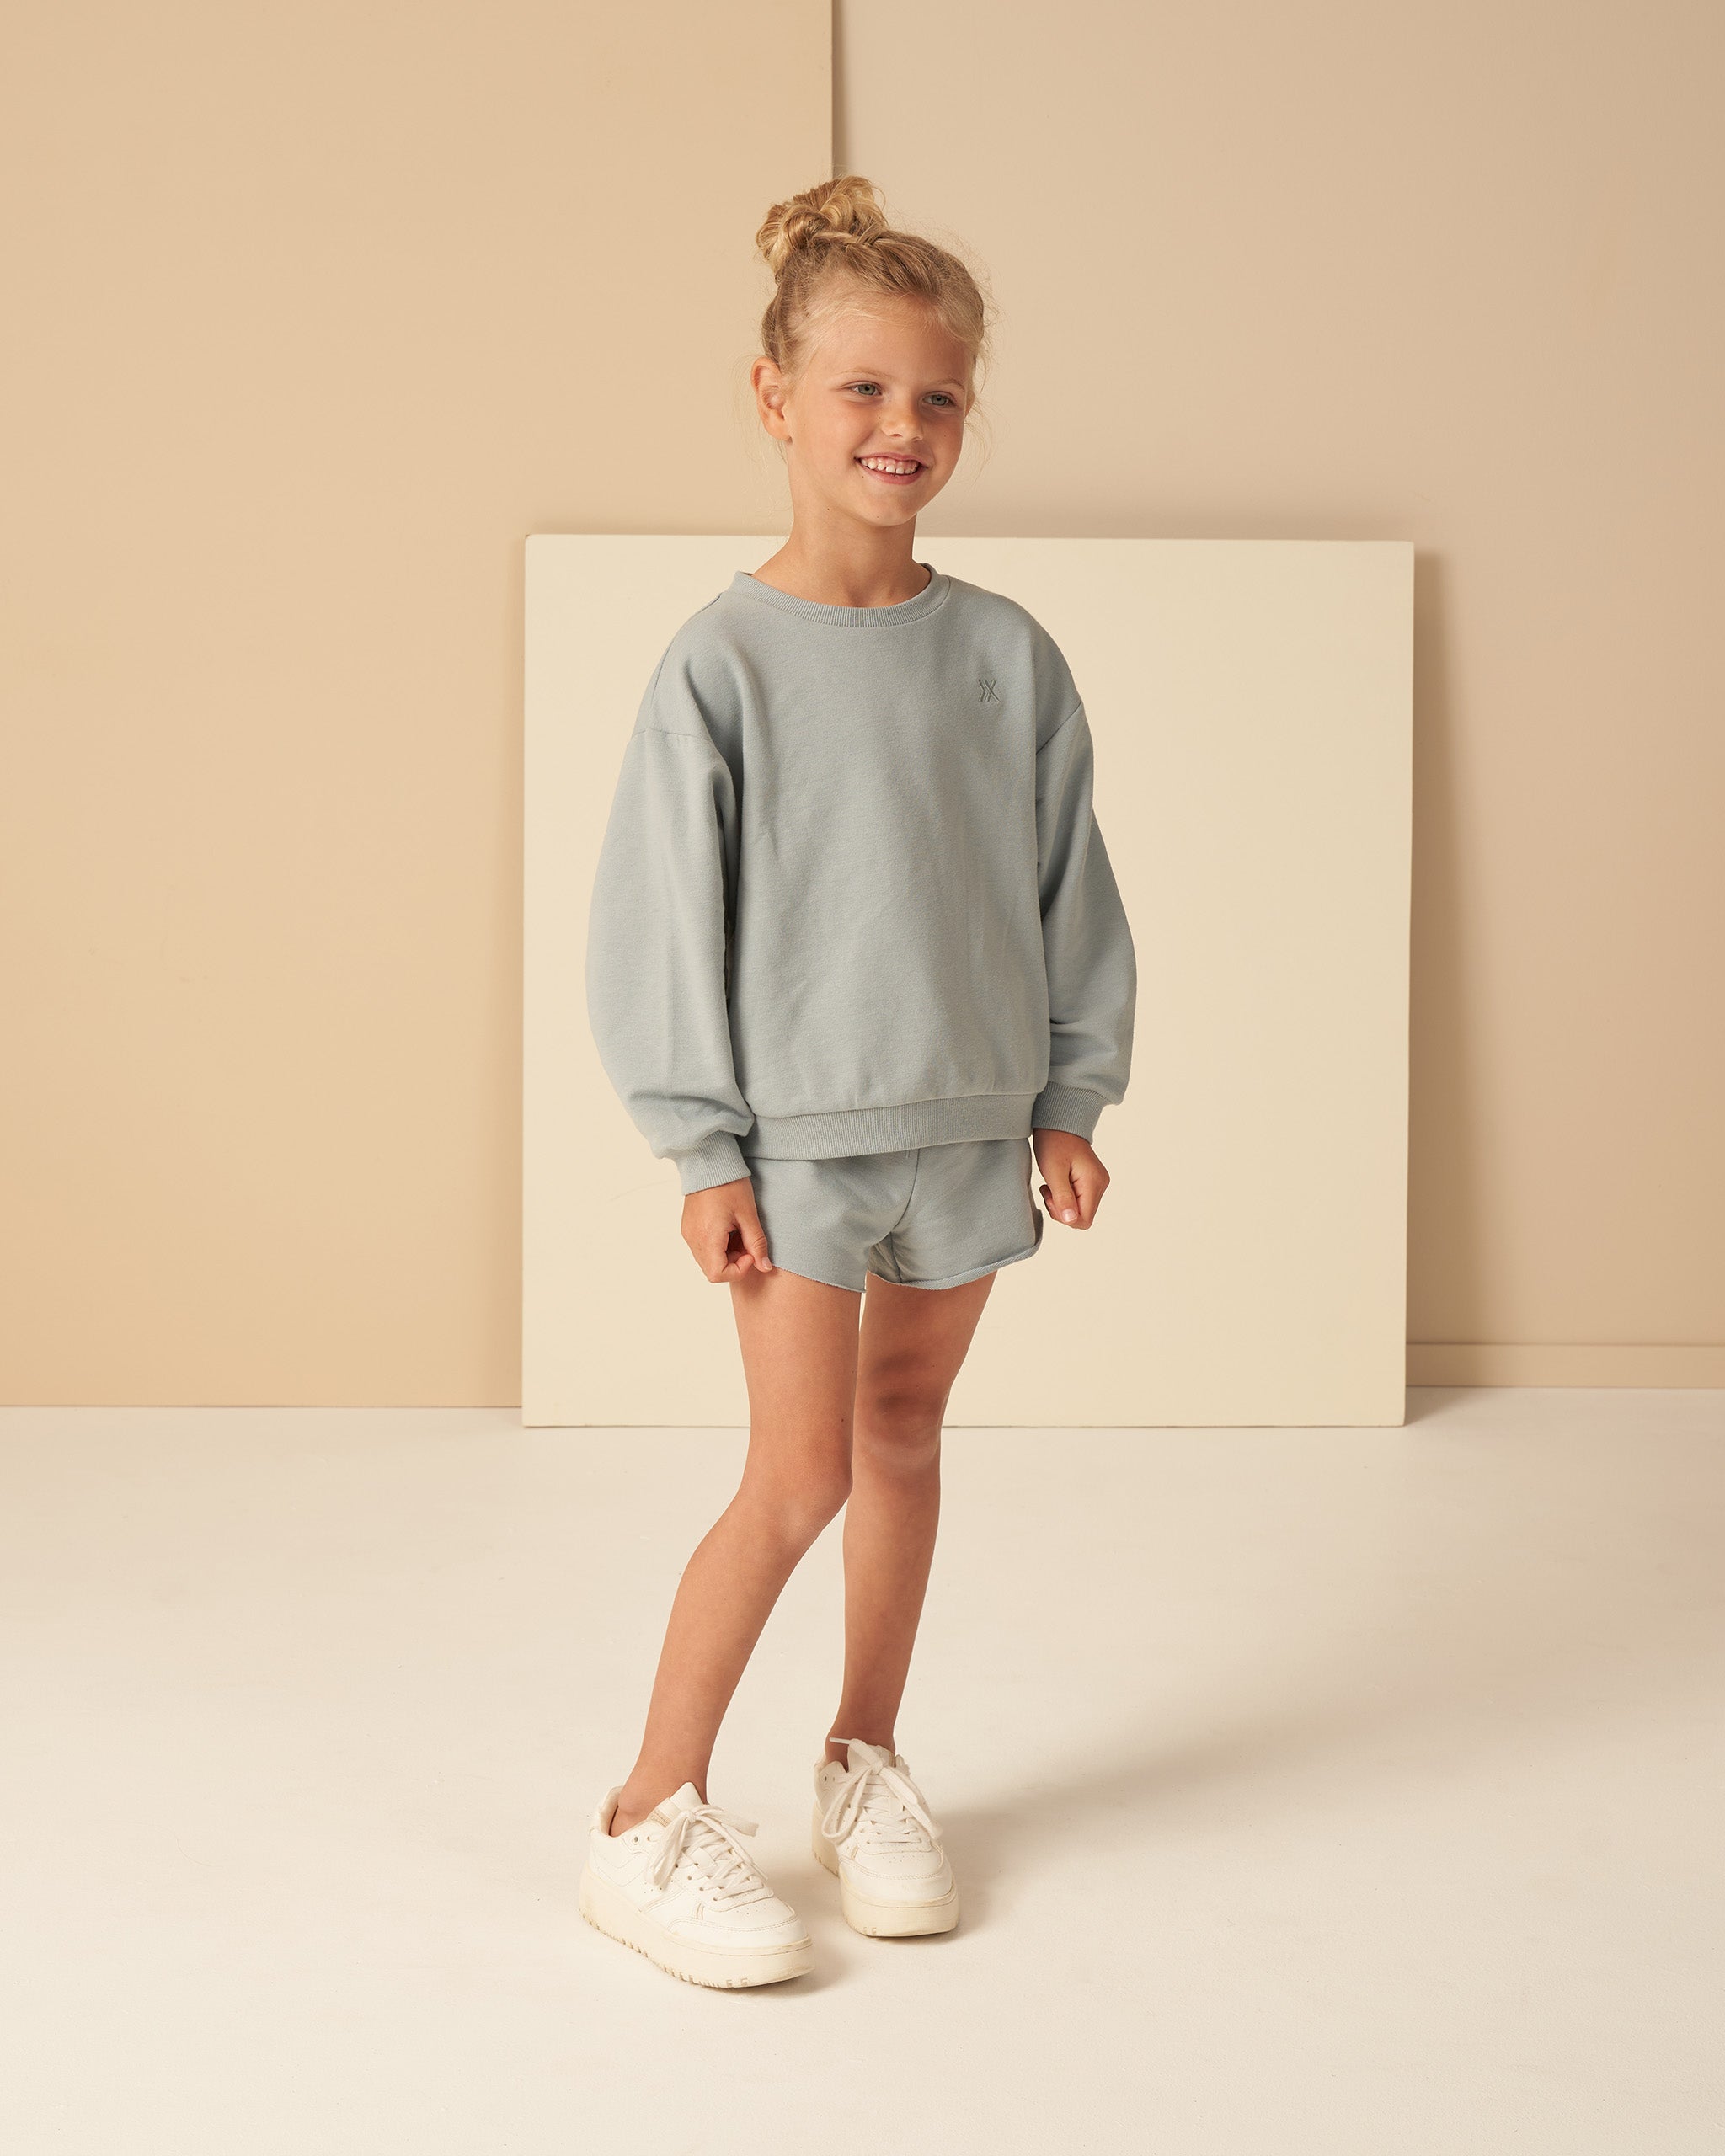 Relaxed Sweatshirt || Blue - Rylee + Cru | Kids Clothes | Trendy Baby Clothes | Modern Infant Outfits |